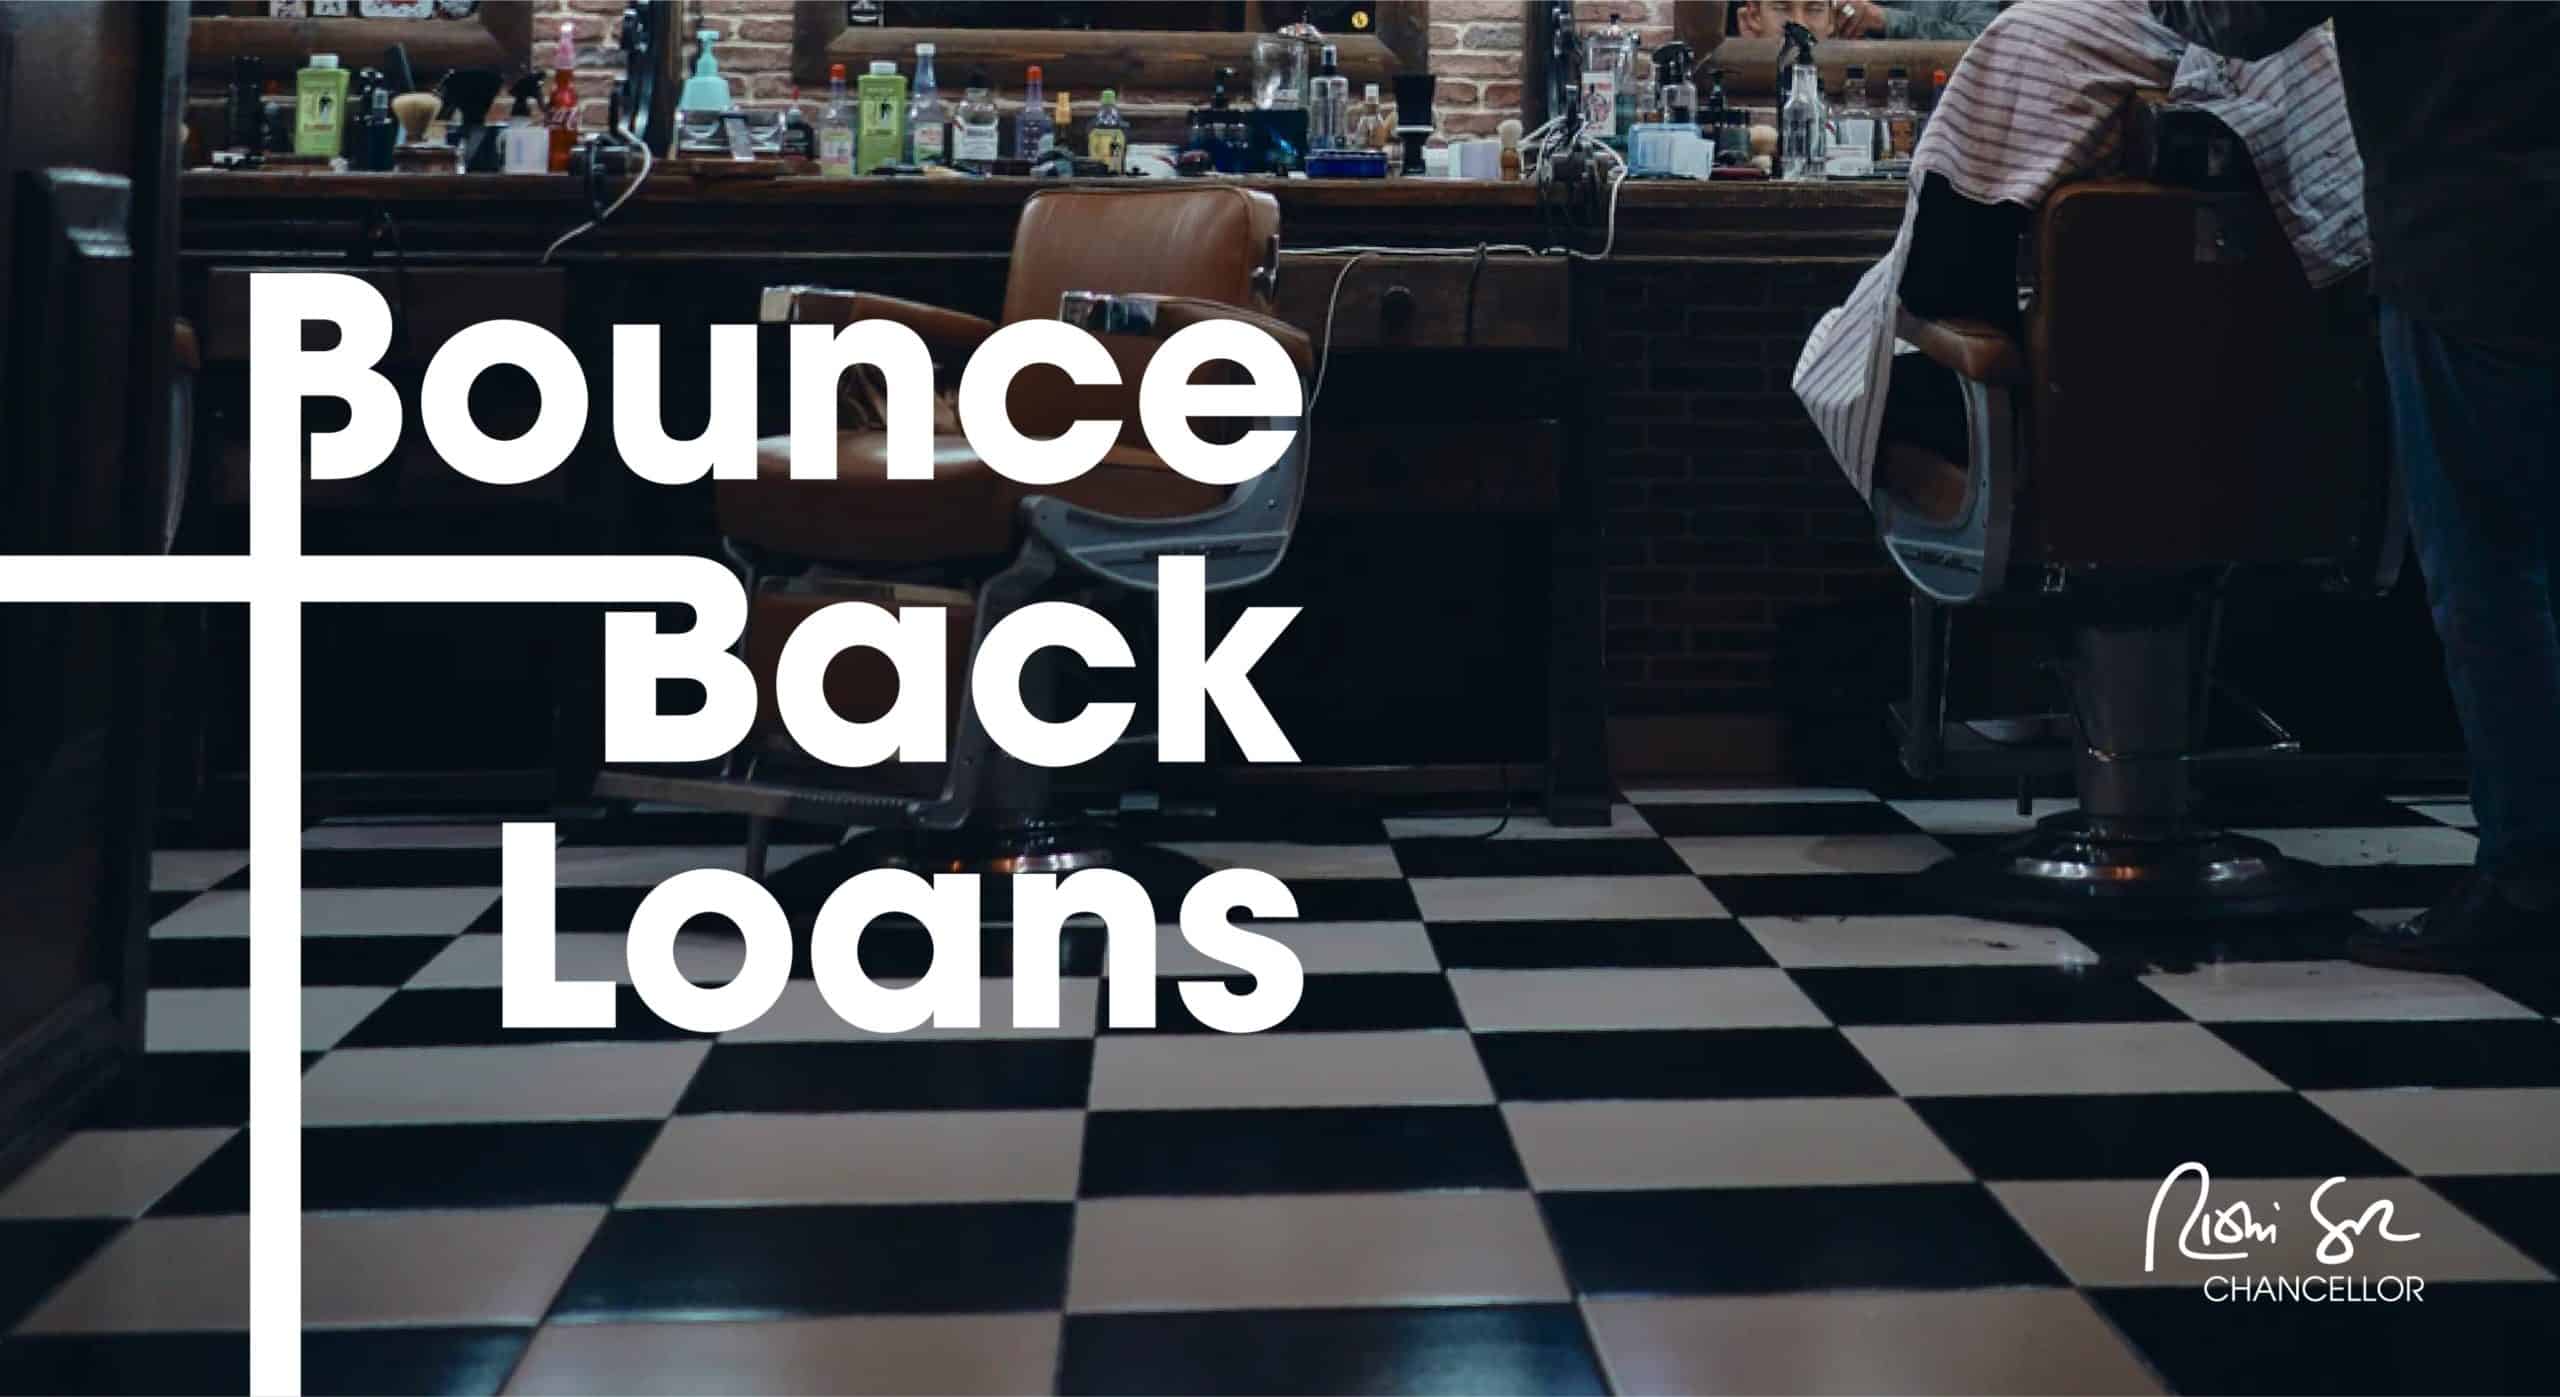 Bounce Back Loan fraud could be lower than previously anticipated